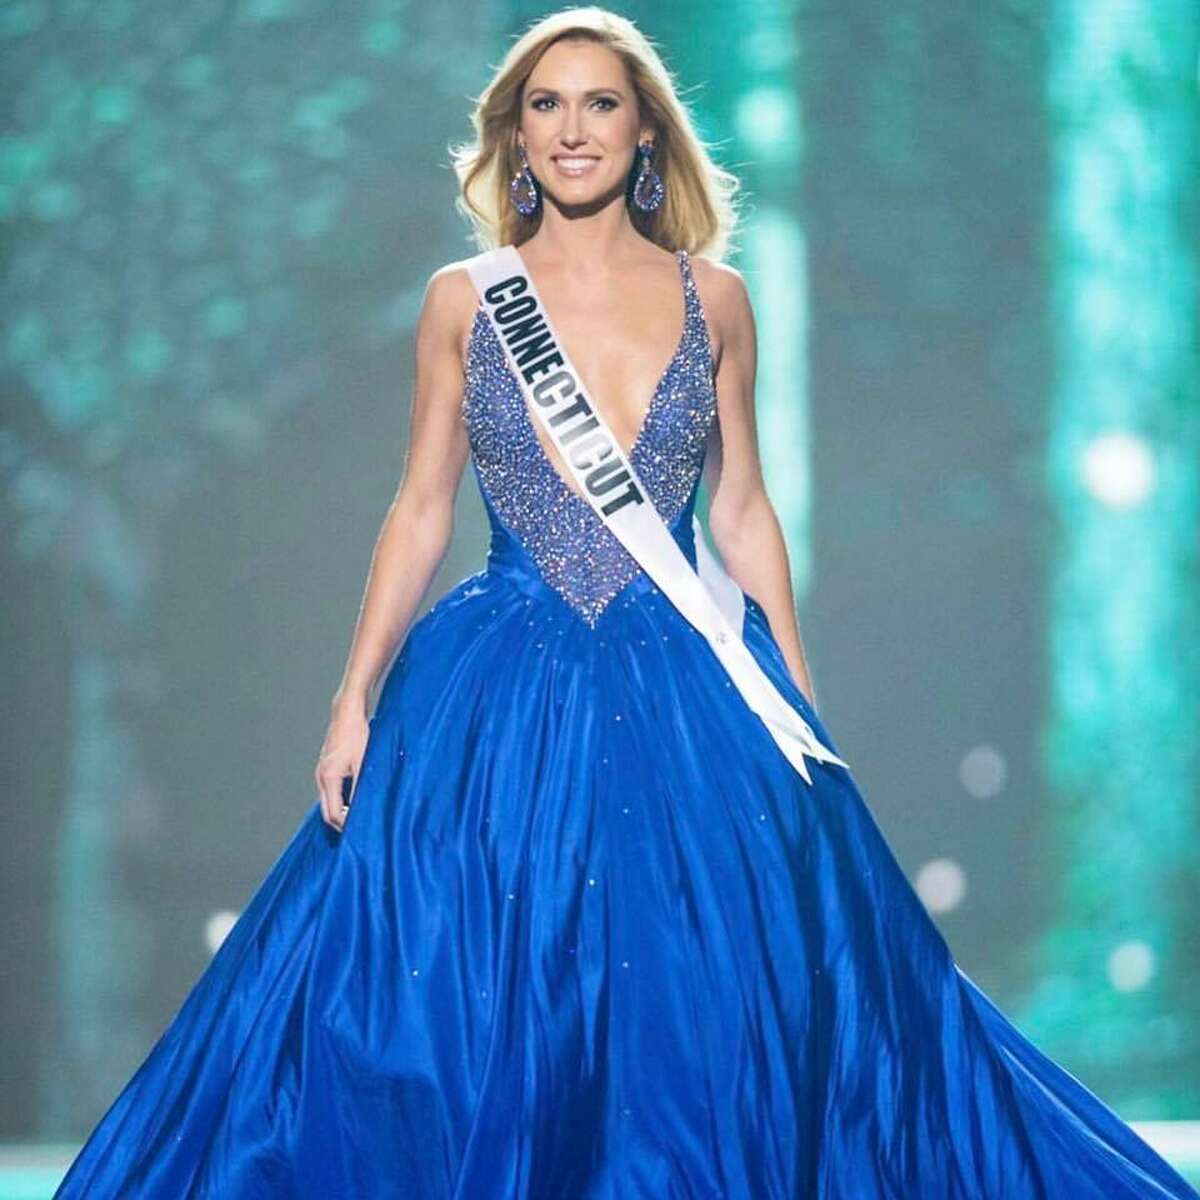 Olga Litvinenko, Miss Connecticut USA, competes on stage in her evening gown during the MISS USA Preliminary Competition at Mandalay Bay Convention Center on May 11, 2017 in Las Vegas.